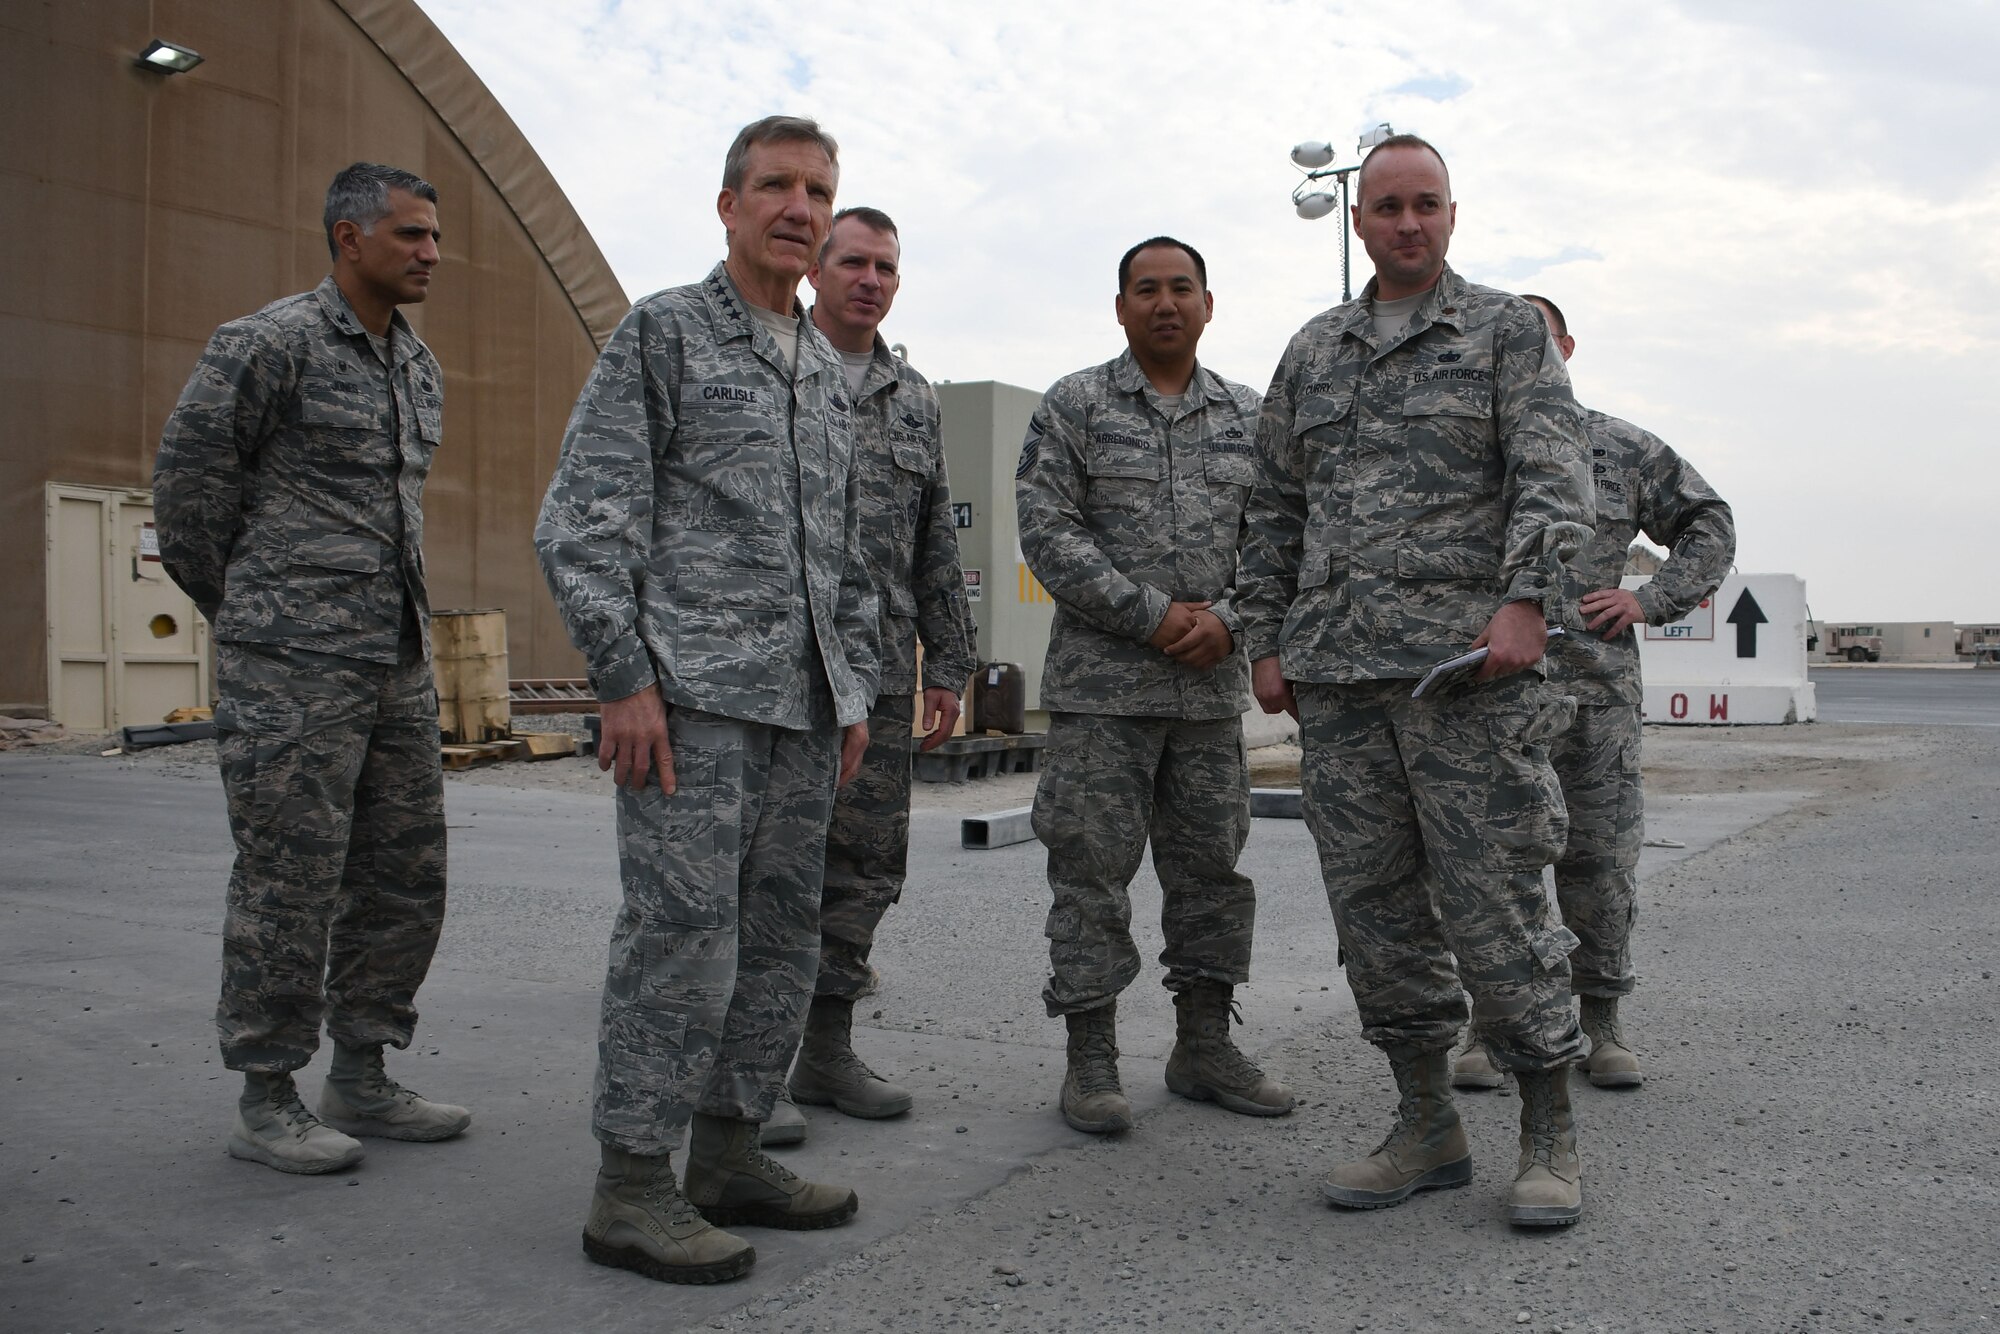 U.S. Air Force Gen. Hawk Carlisle, commander of Air Combat Command, tours the 386th aerial port Nov. 23, 2016 at an undisclosed location in Southwest Asia. Carlisle visited the 386th to gain appreciation for the wing's operations throughout the U.S. Central Command region and to thank Airmen personally for their service during the holiday season. (U.S. Air Force photo/Senior Airman Andrew Park)